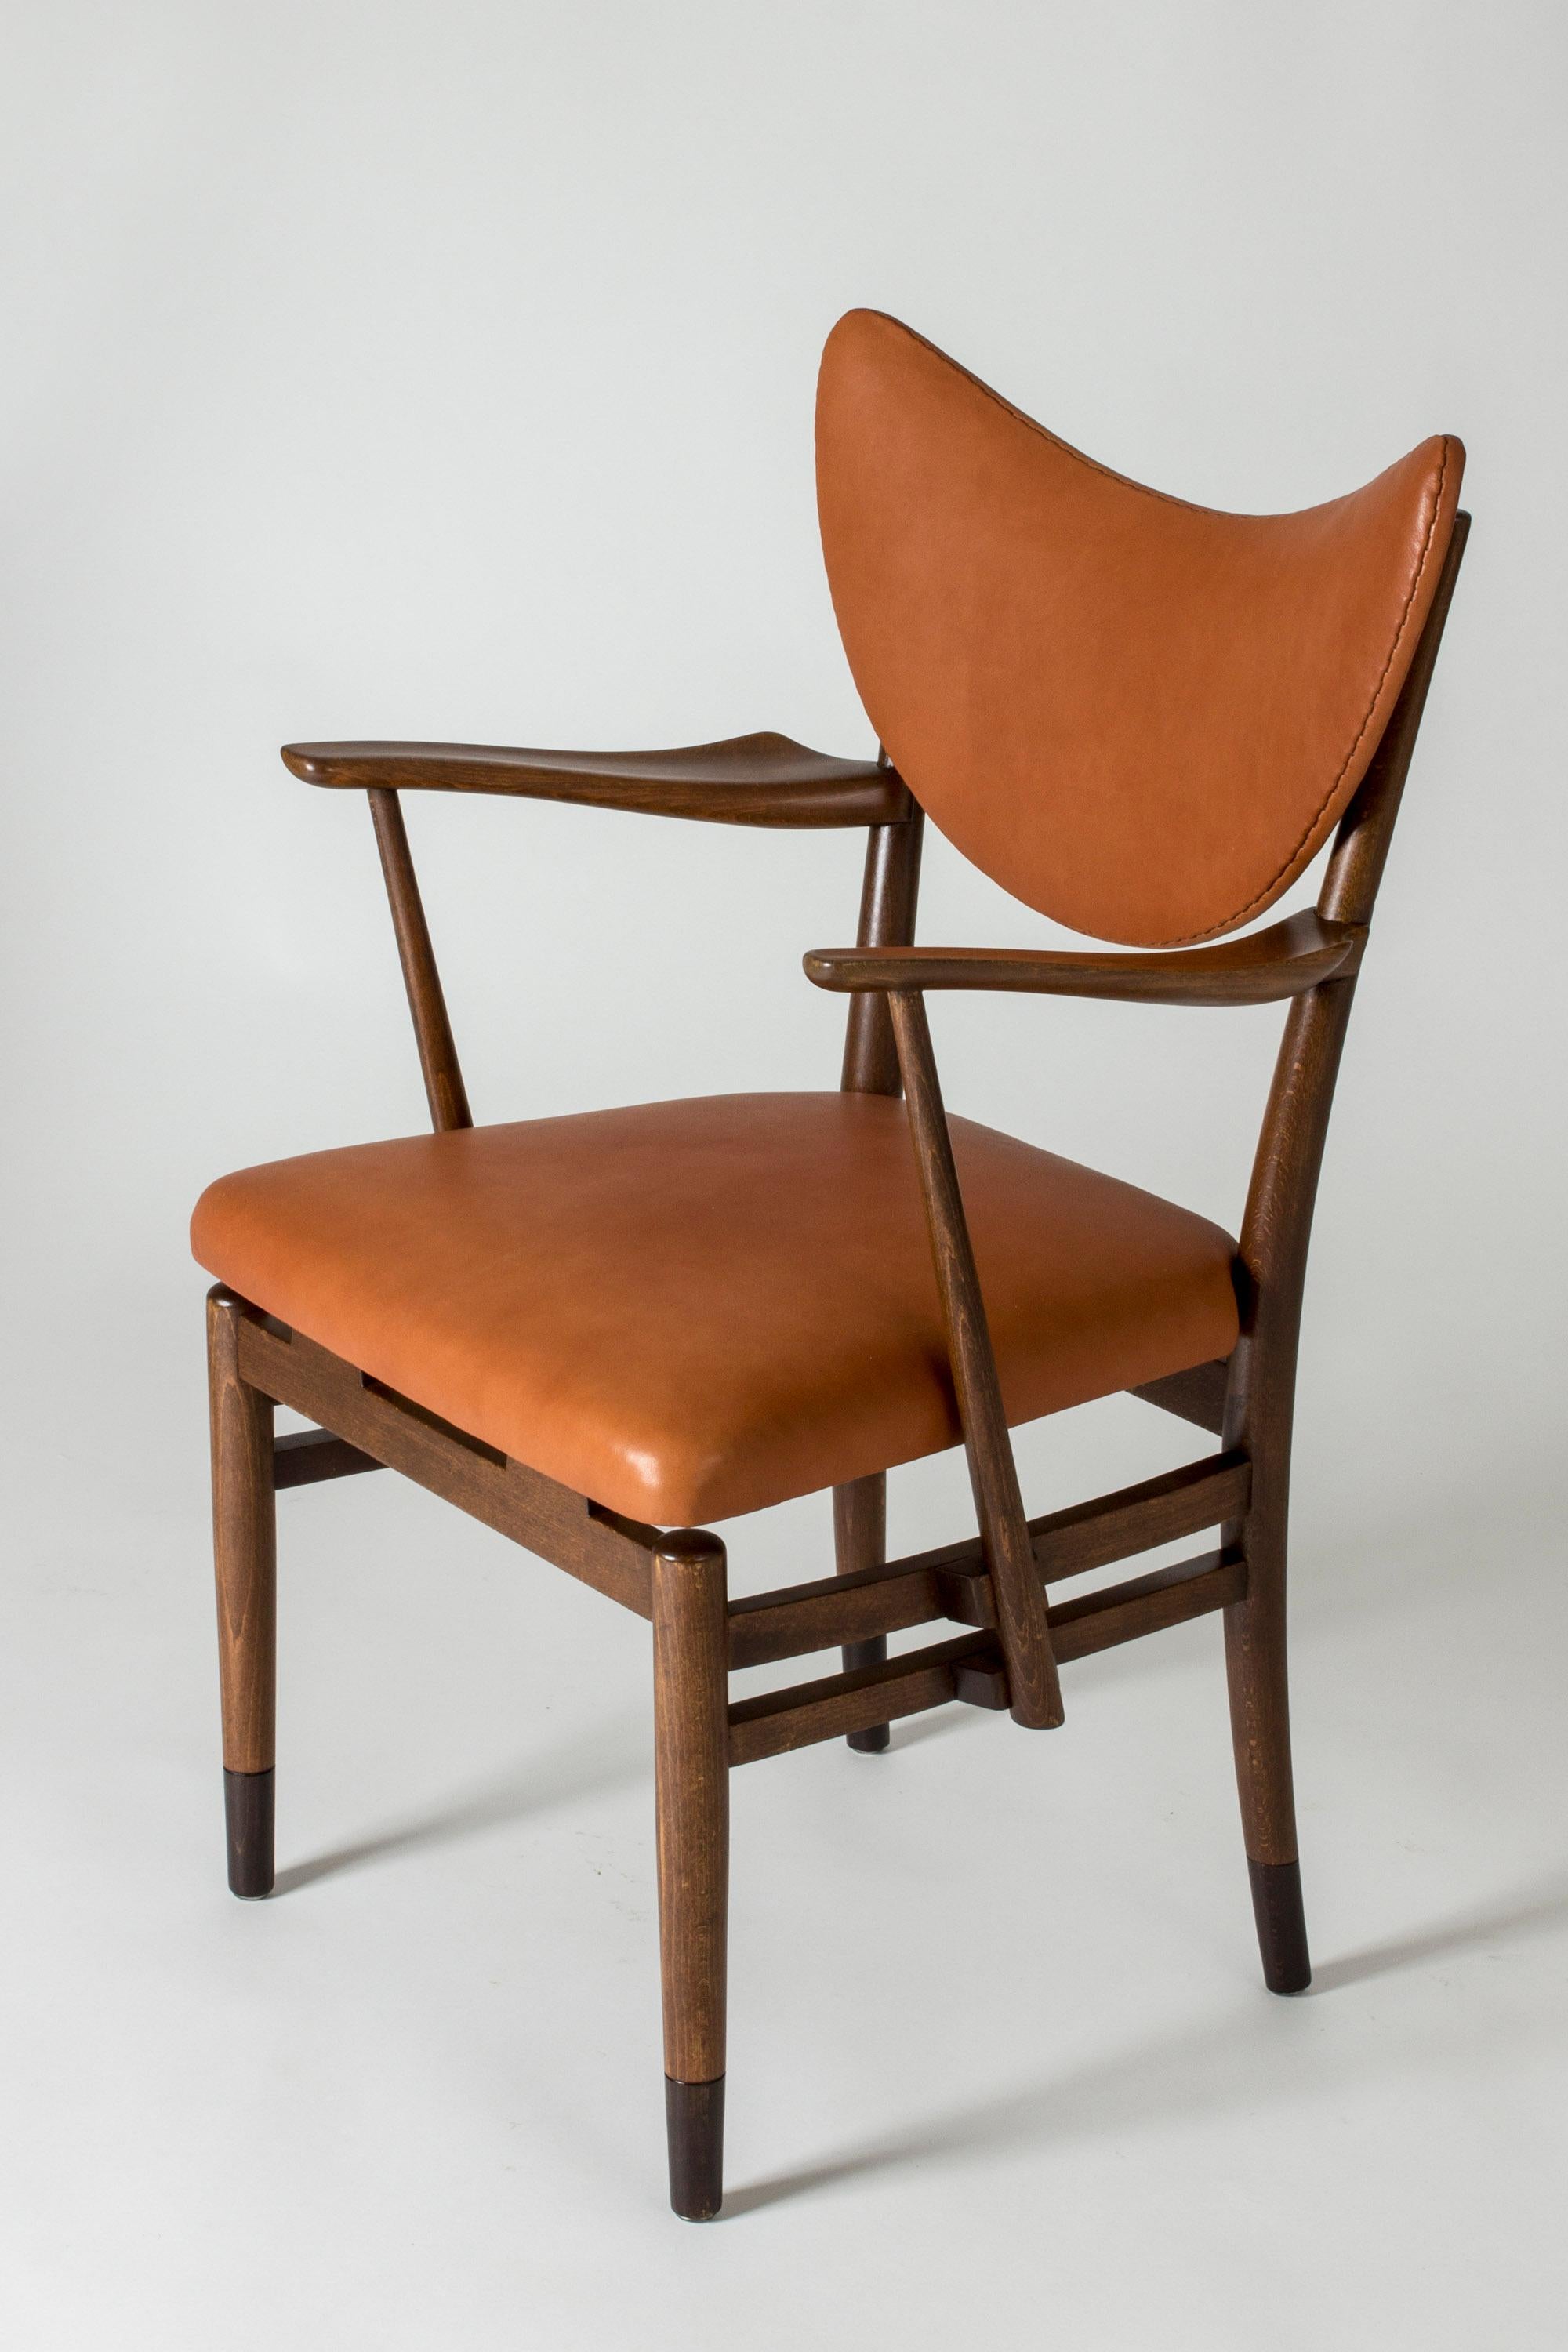 Danish Leather Armchair Attributed to Eva and Nils Koppel, Denmark, 1950s